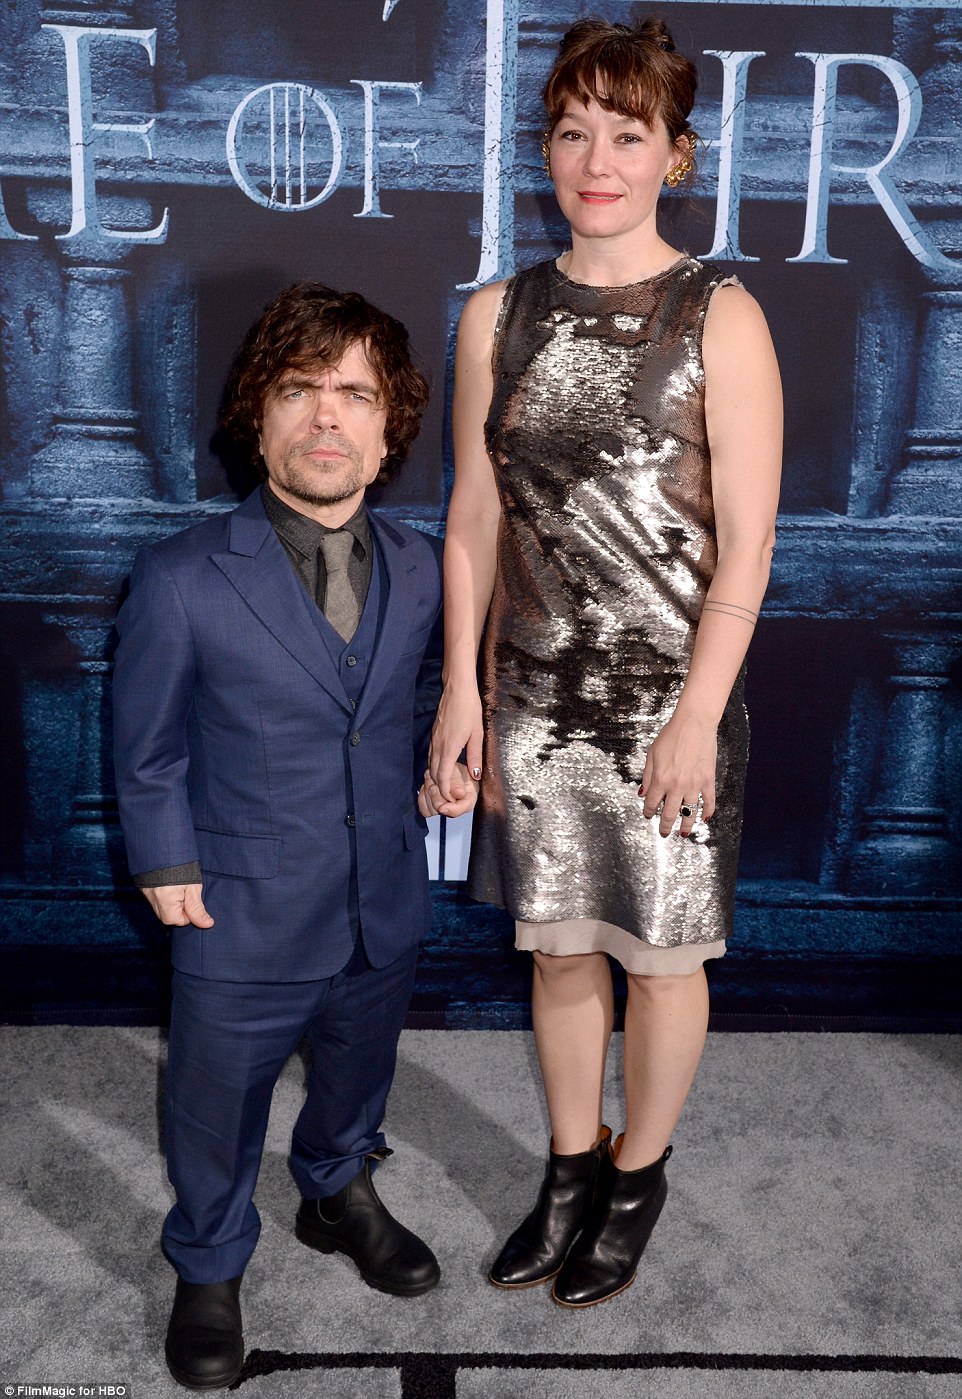 tyrion and wife